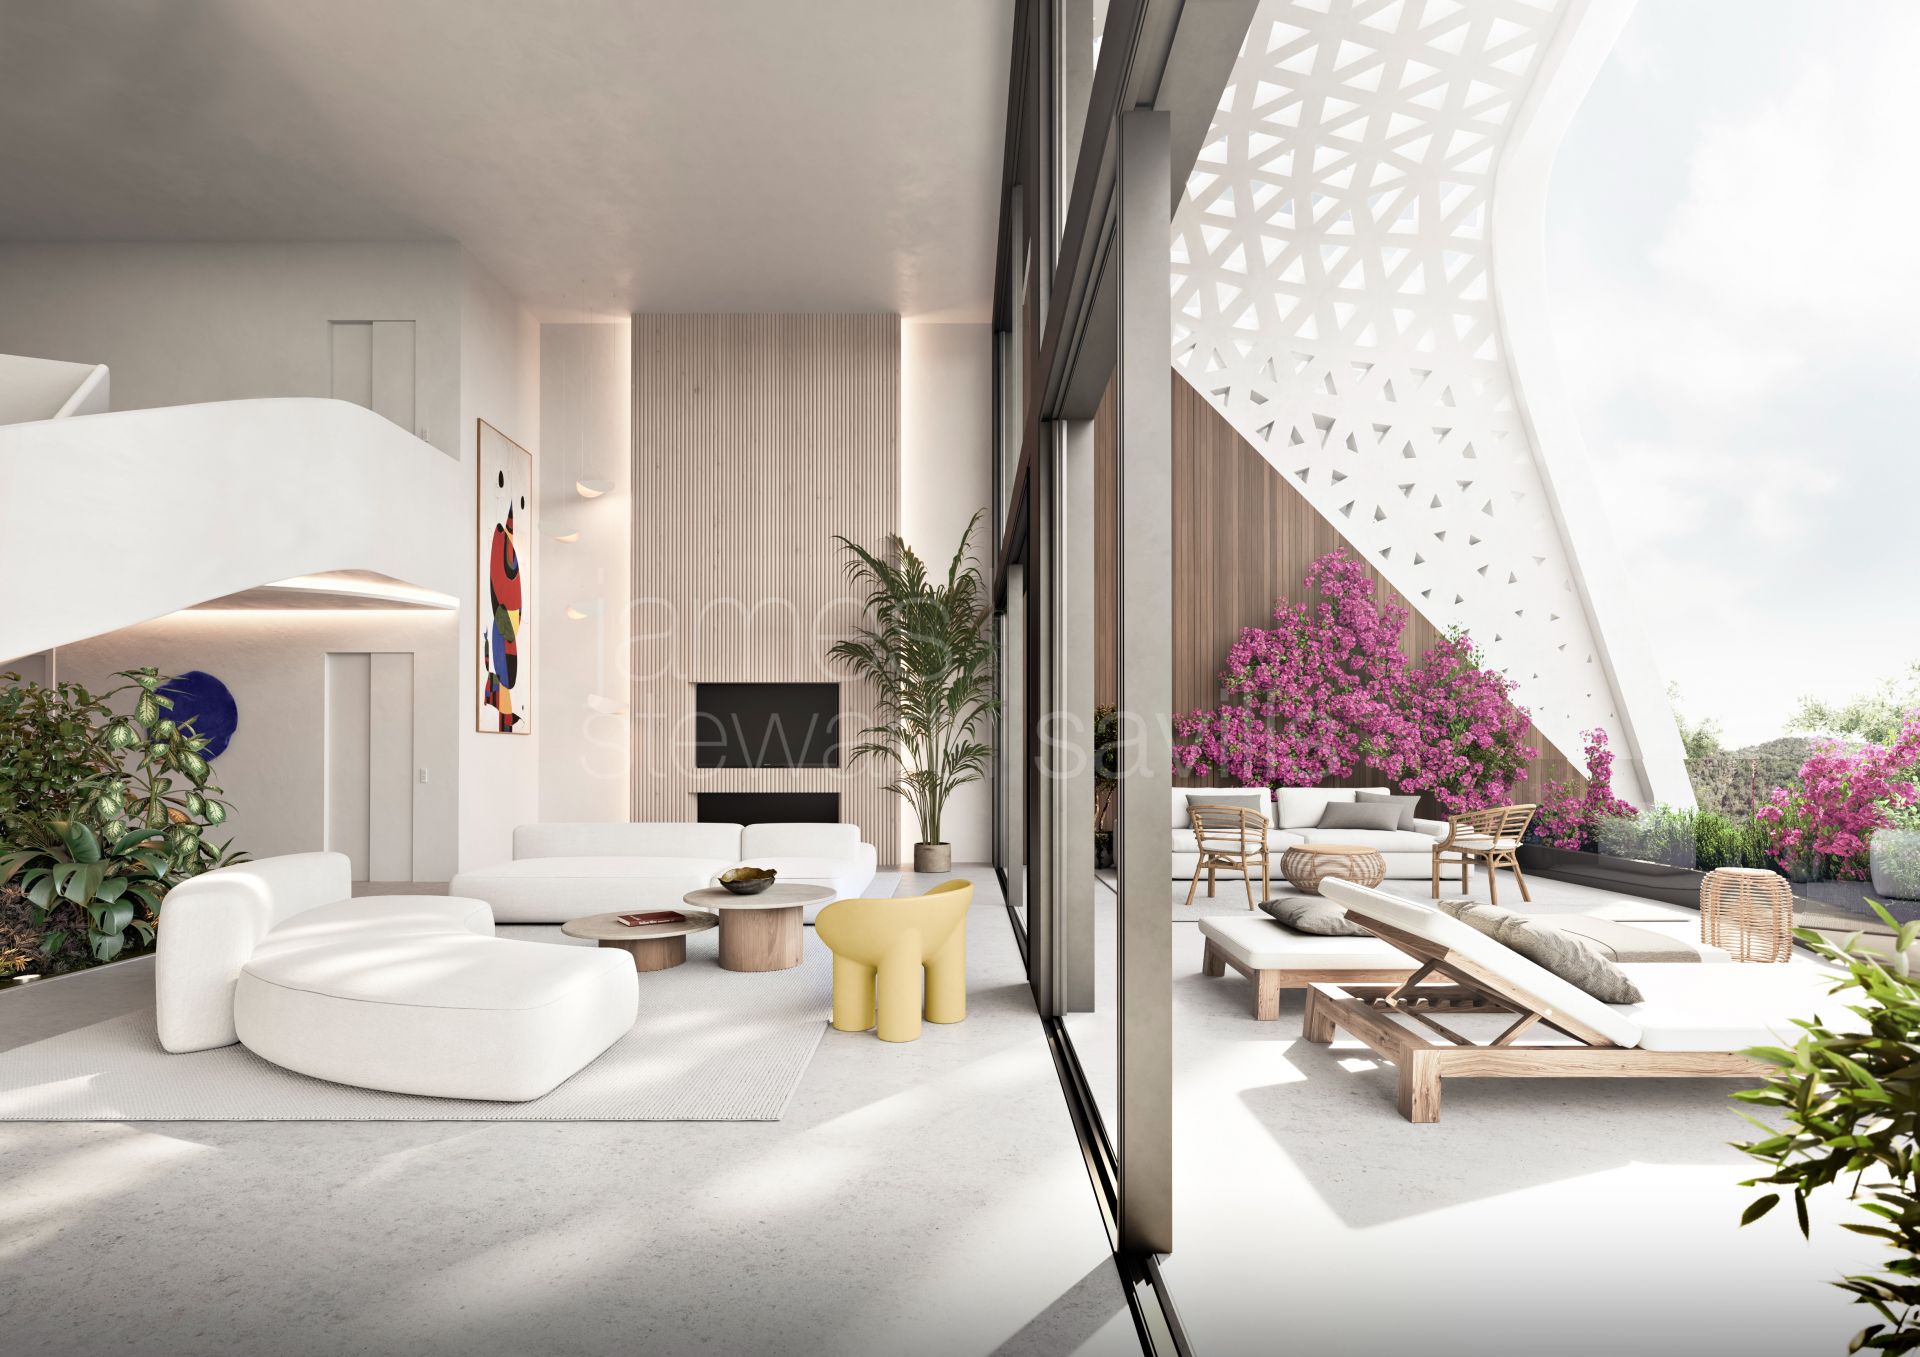 Fabulous new project of futuristic apartments next to Sotogrande - 3 bedroom units from € 1,109,000